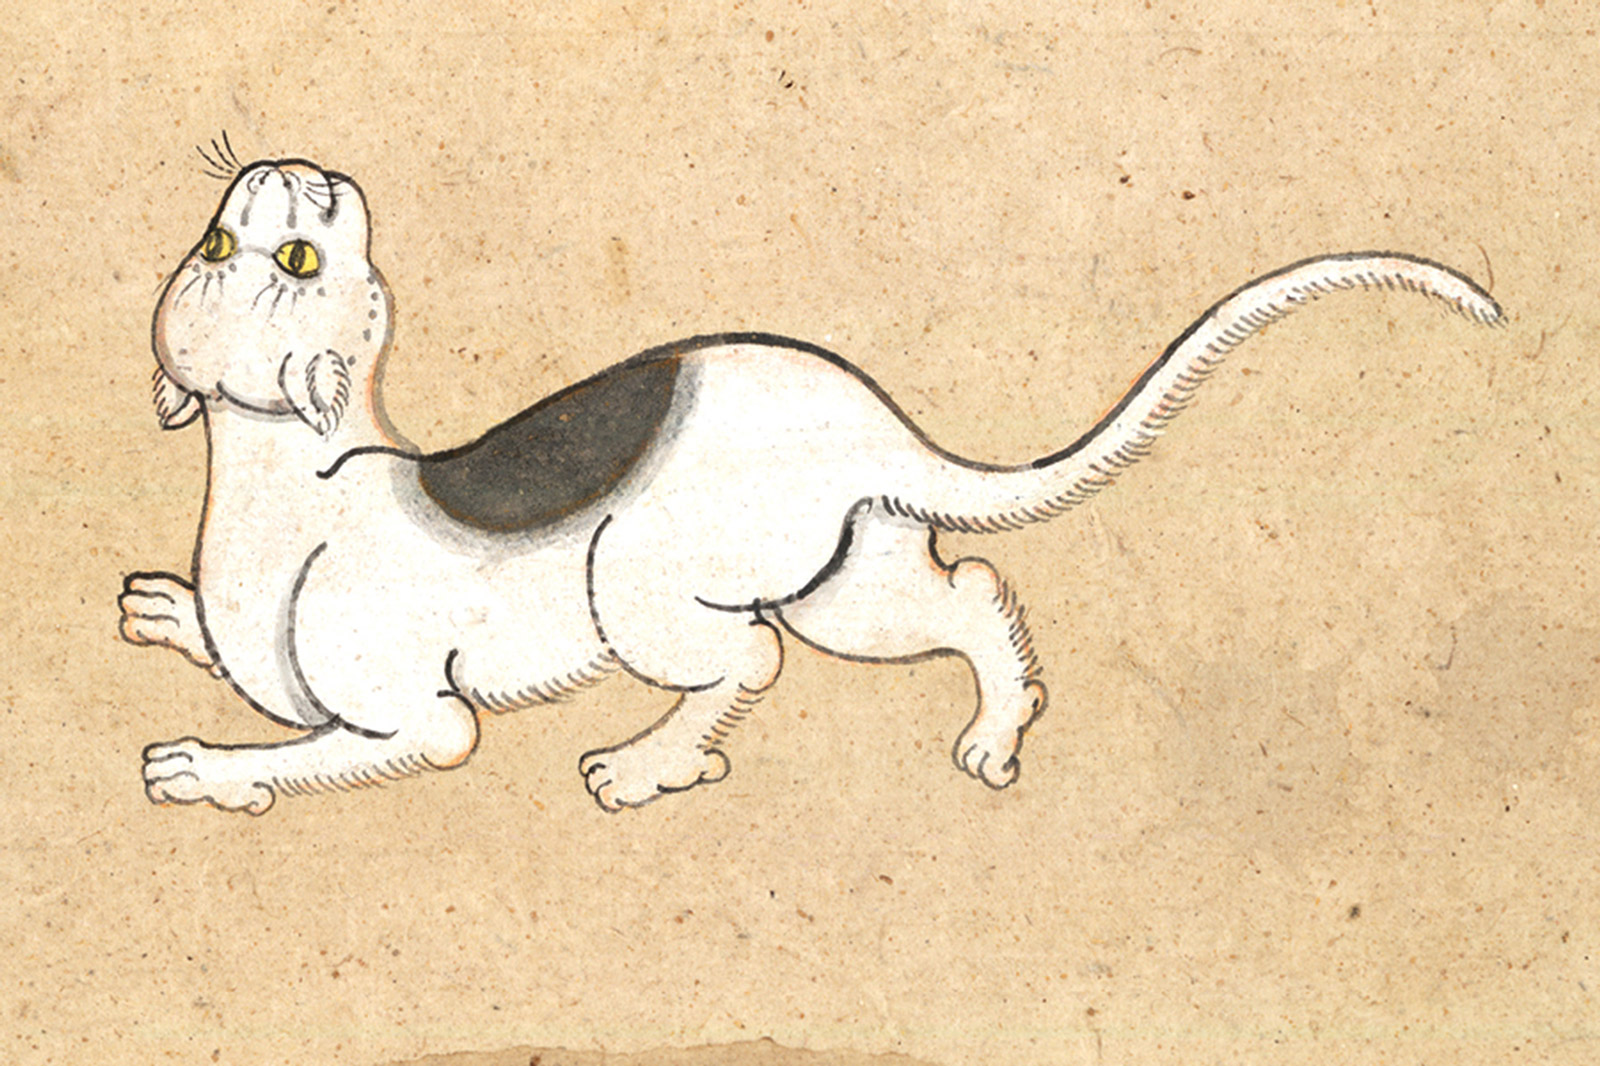 An illustration of a Krorp Waen (Spectacle Frame) or Aan Maa (Horse Saddle) cat from a mid-nineteenth-century manuscript titled “Tamra Maew.” The accompanying caption reads: “Spectacle Frame is the name. White as cliffs,
Black fur around the eyes, as if dyed.
On the back, like a horse’s saddle,
A beautiful inky circle. Found in any country.”